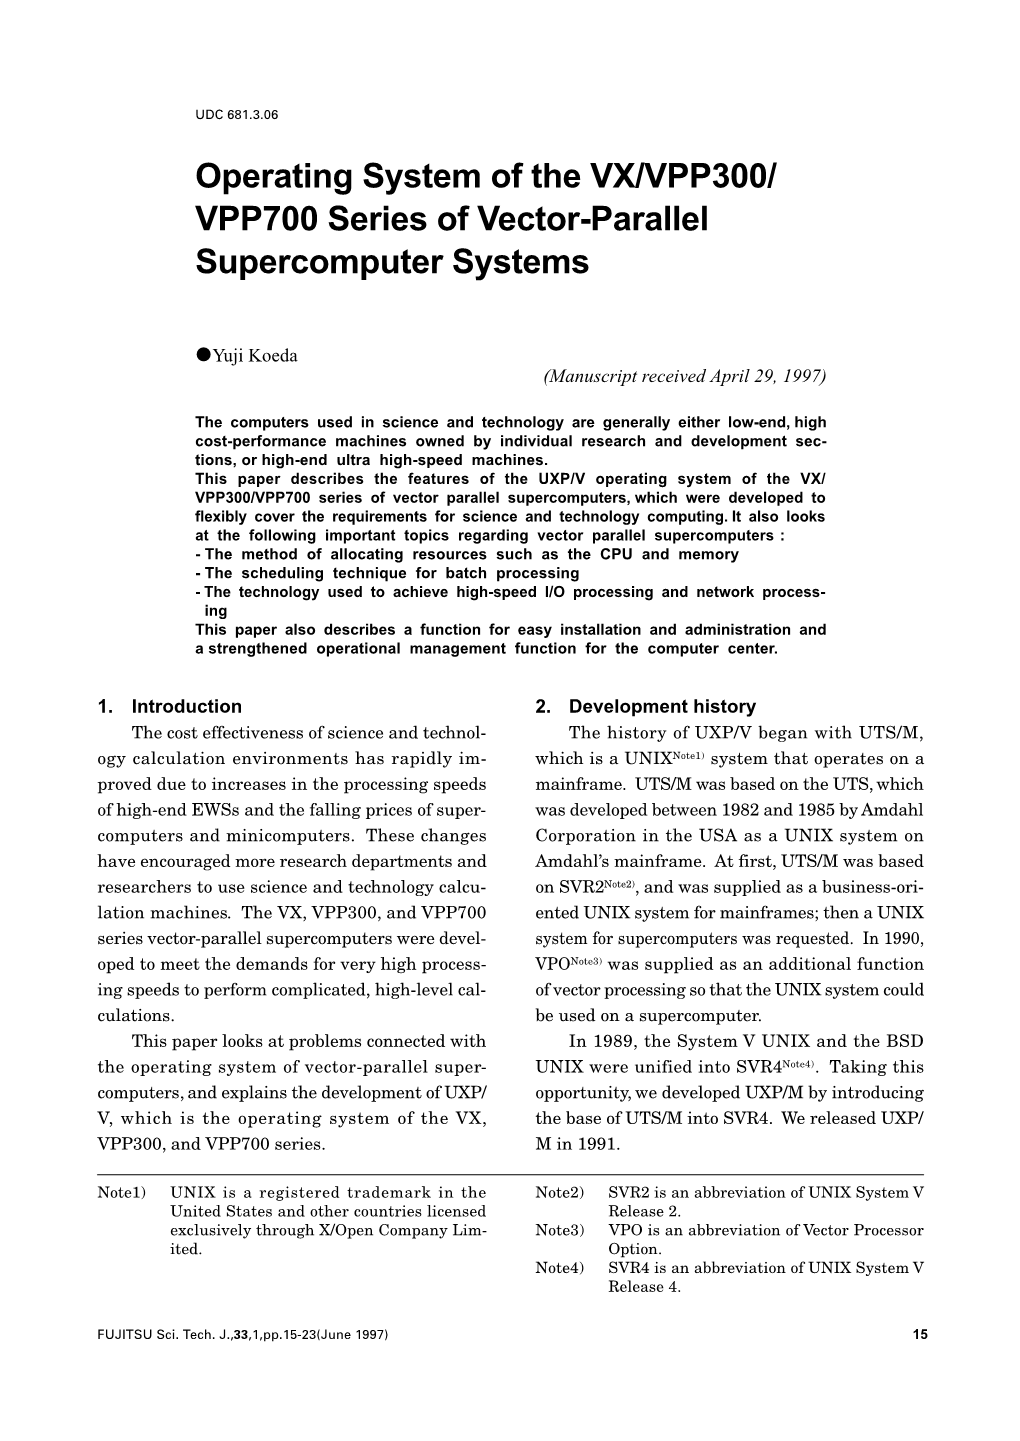 Operating System of the VX/VPP300/VPP700 Series of Vector-Parallel Supercomputer Systems